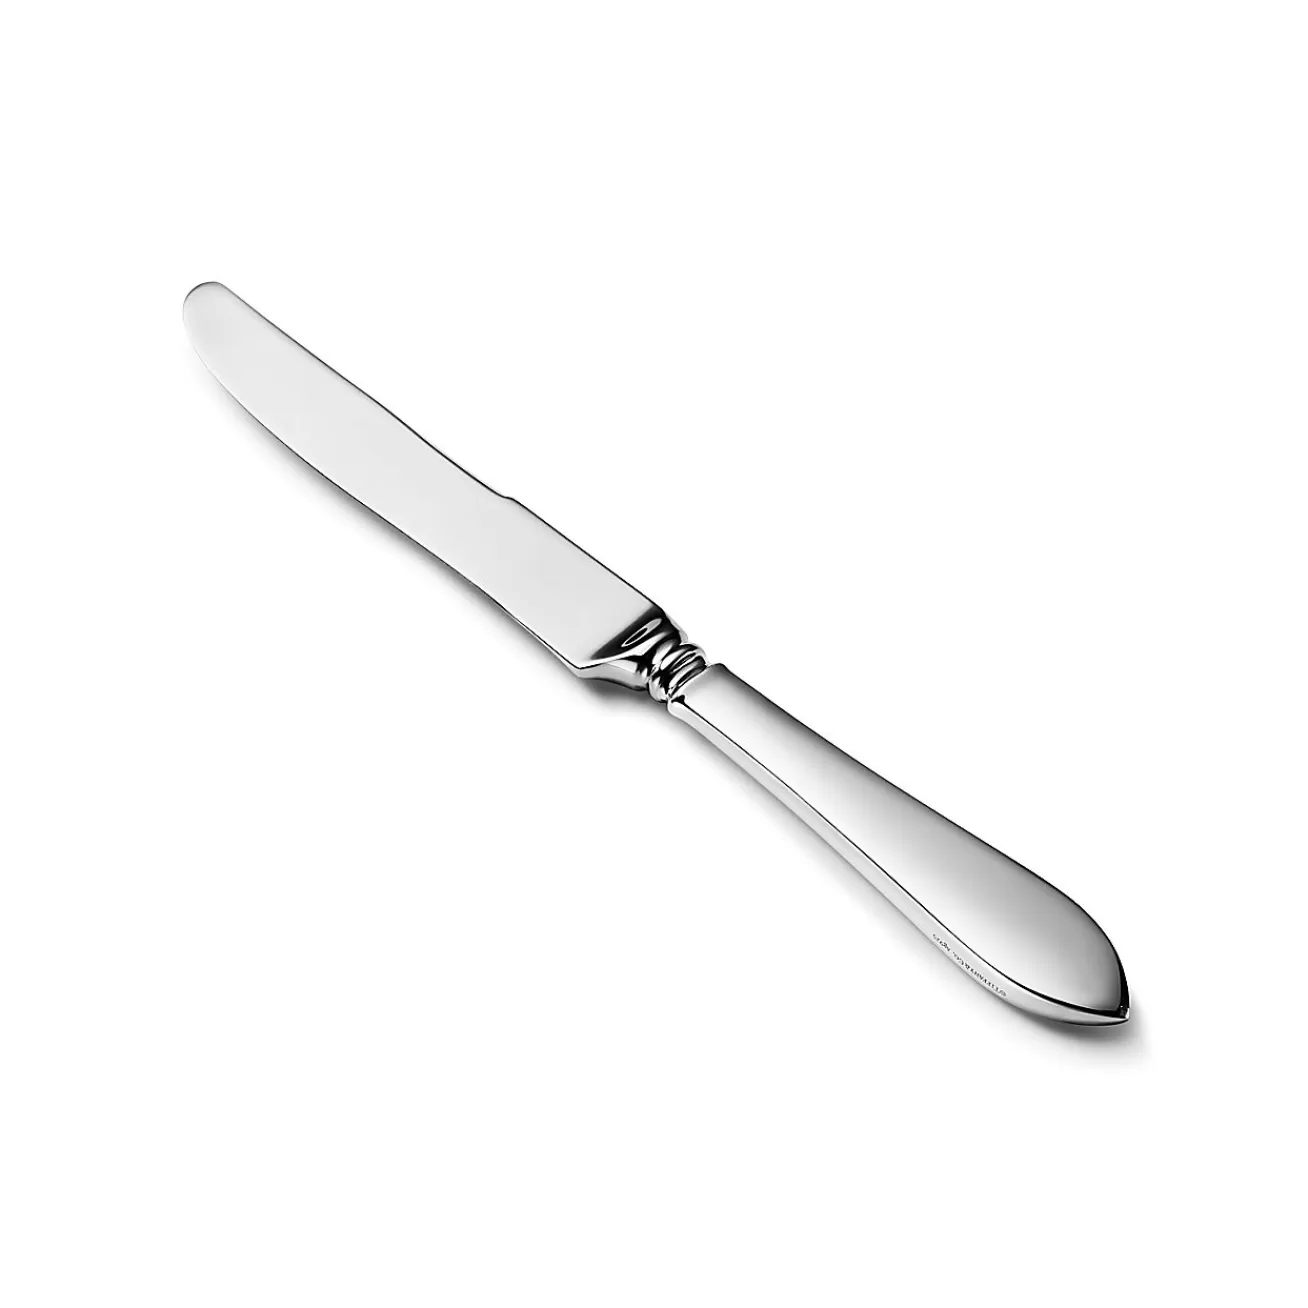 Tiffany & Co. Faneuil dinner knife in sterling silver. | ^ Tableware